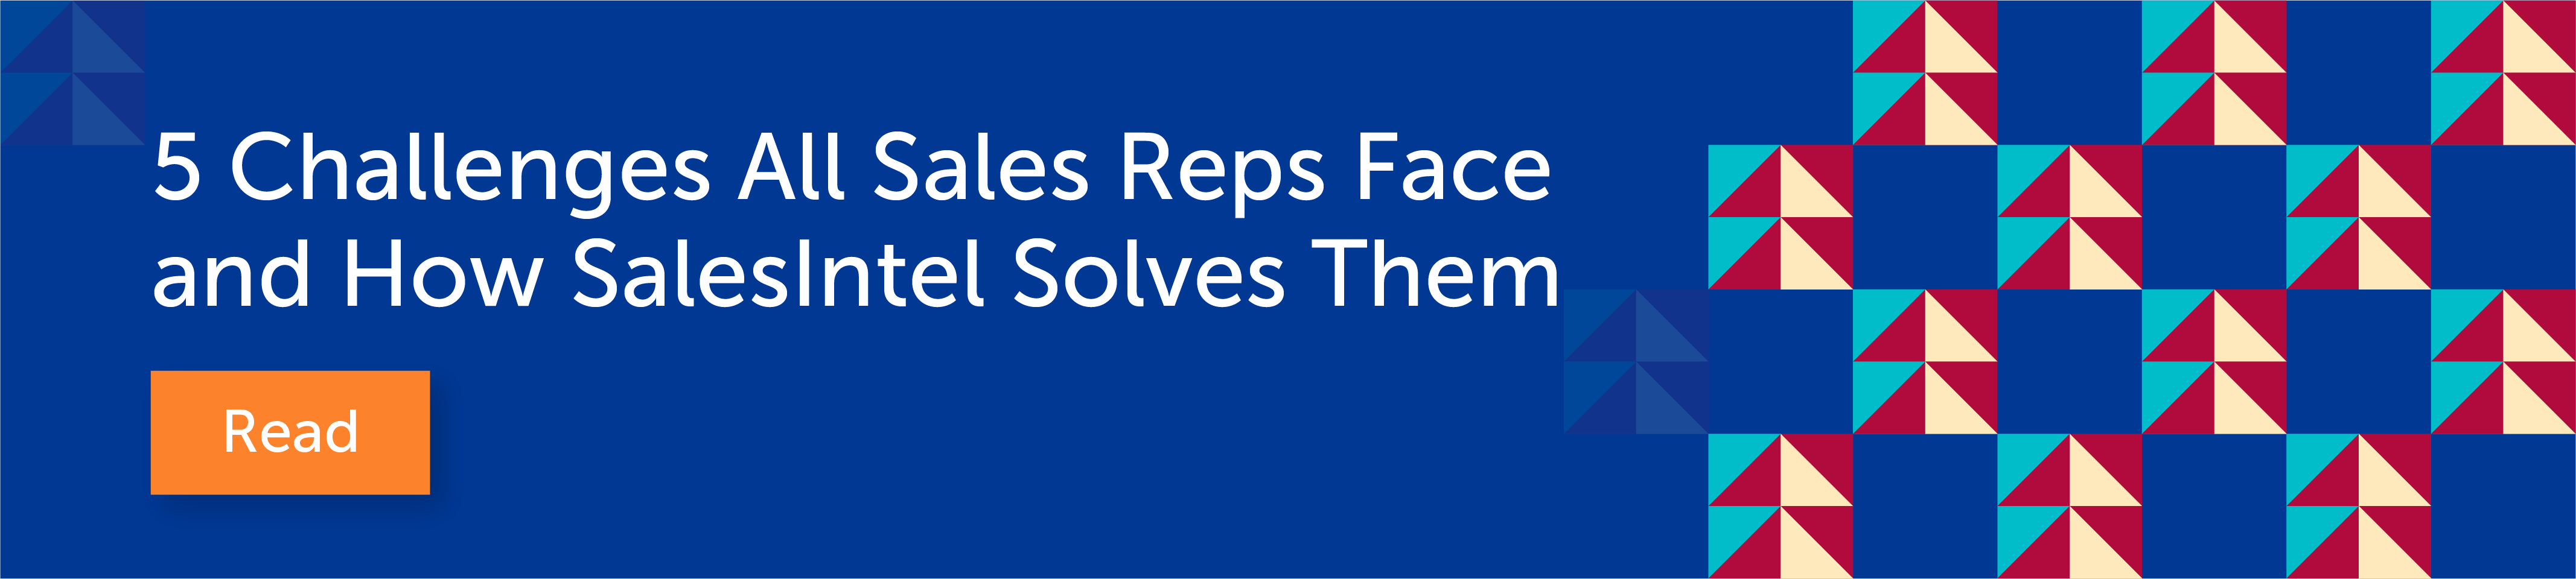 Challenges All Sales Reps Face and How SalesIntel Solves Them